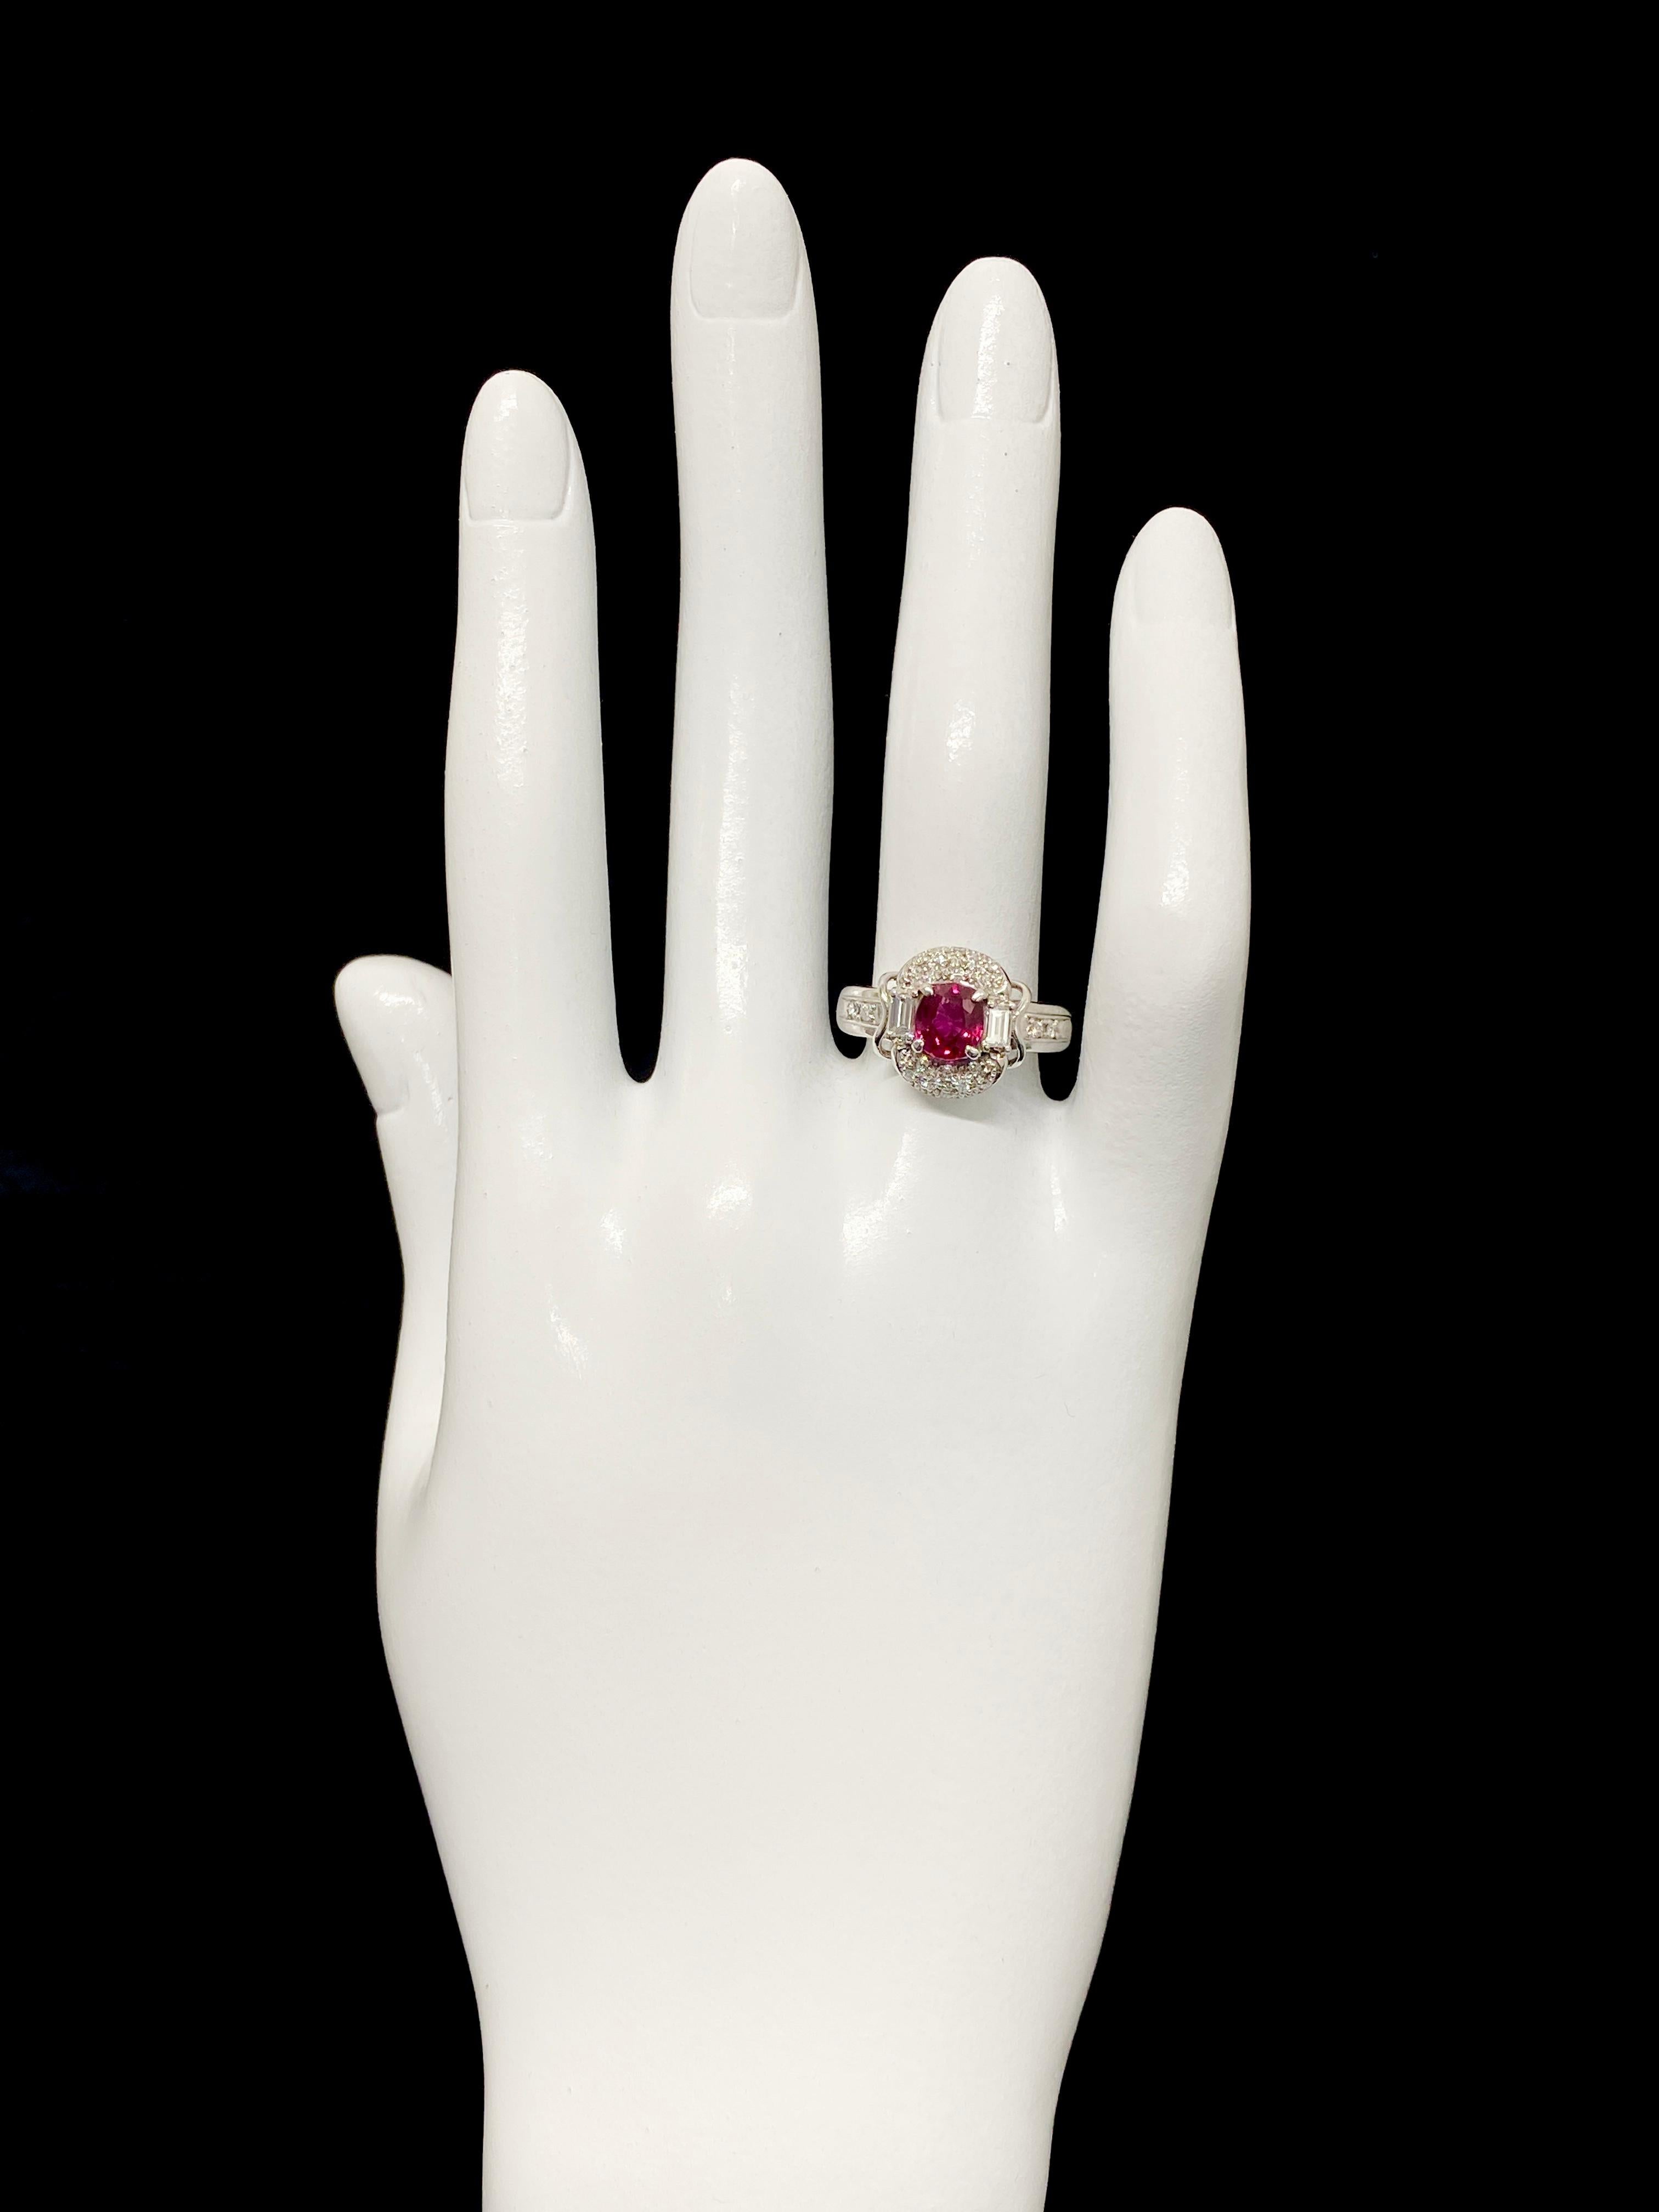 Modern 1.19 Carat Natural Vivid Red Ruby and Diamond Ring Set in Platinum For Sale